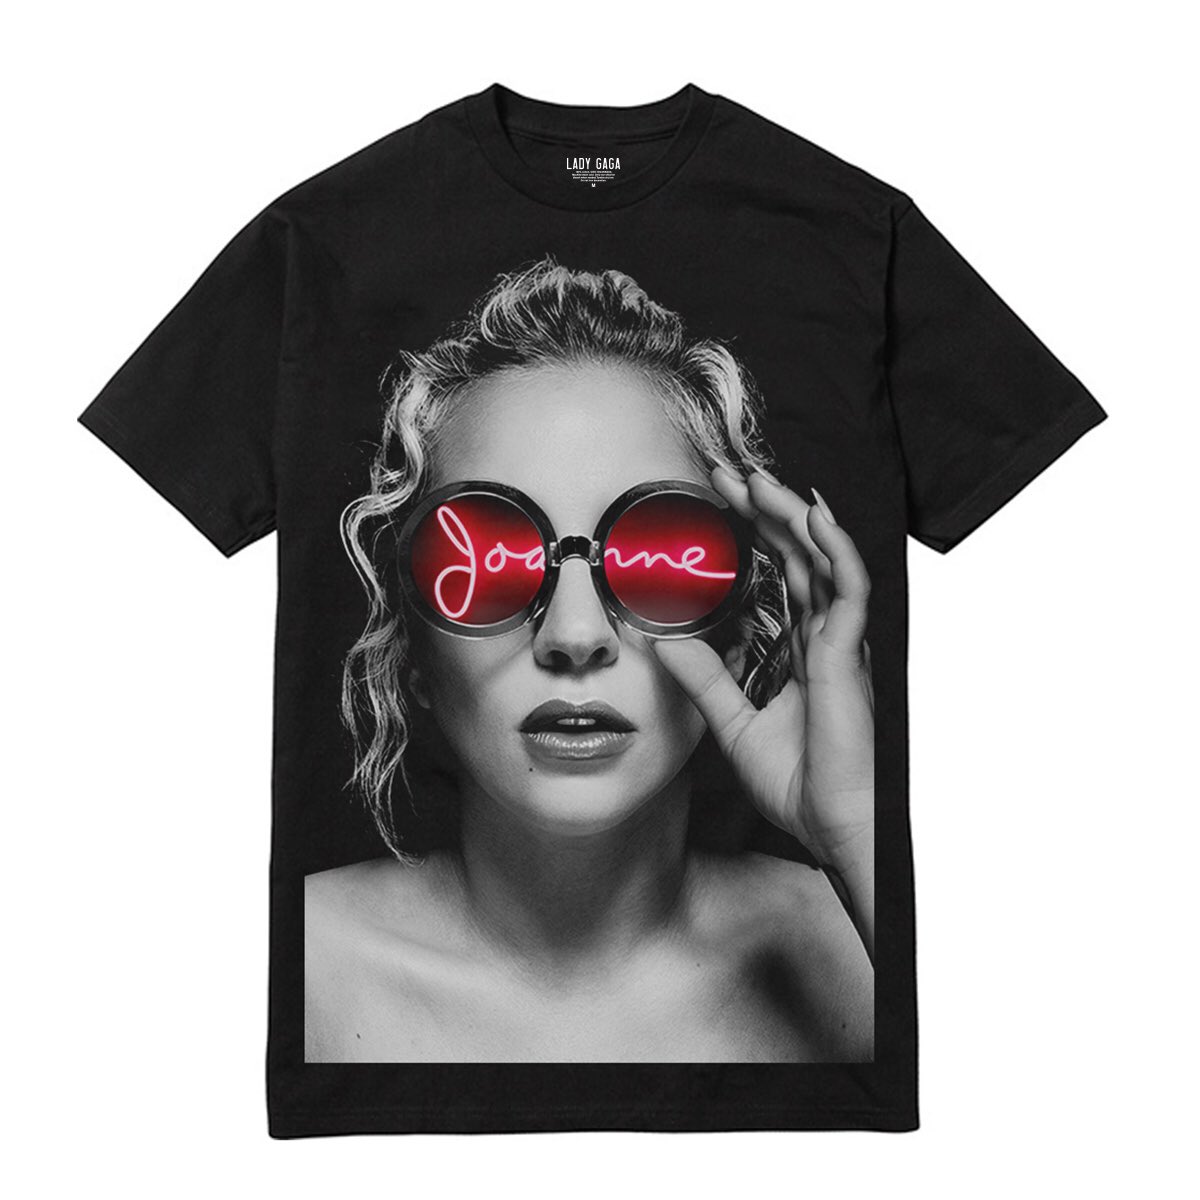 New merch for #SB51 #JohnWayne and #JOANNEWorldTour are up in my official shop ???????? https://t.co/ndsG3b2KyI https://t.co/3cEHtcArlY